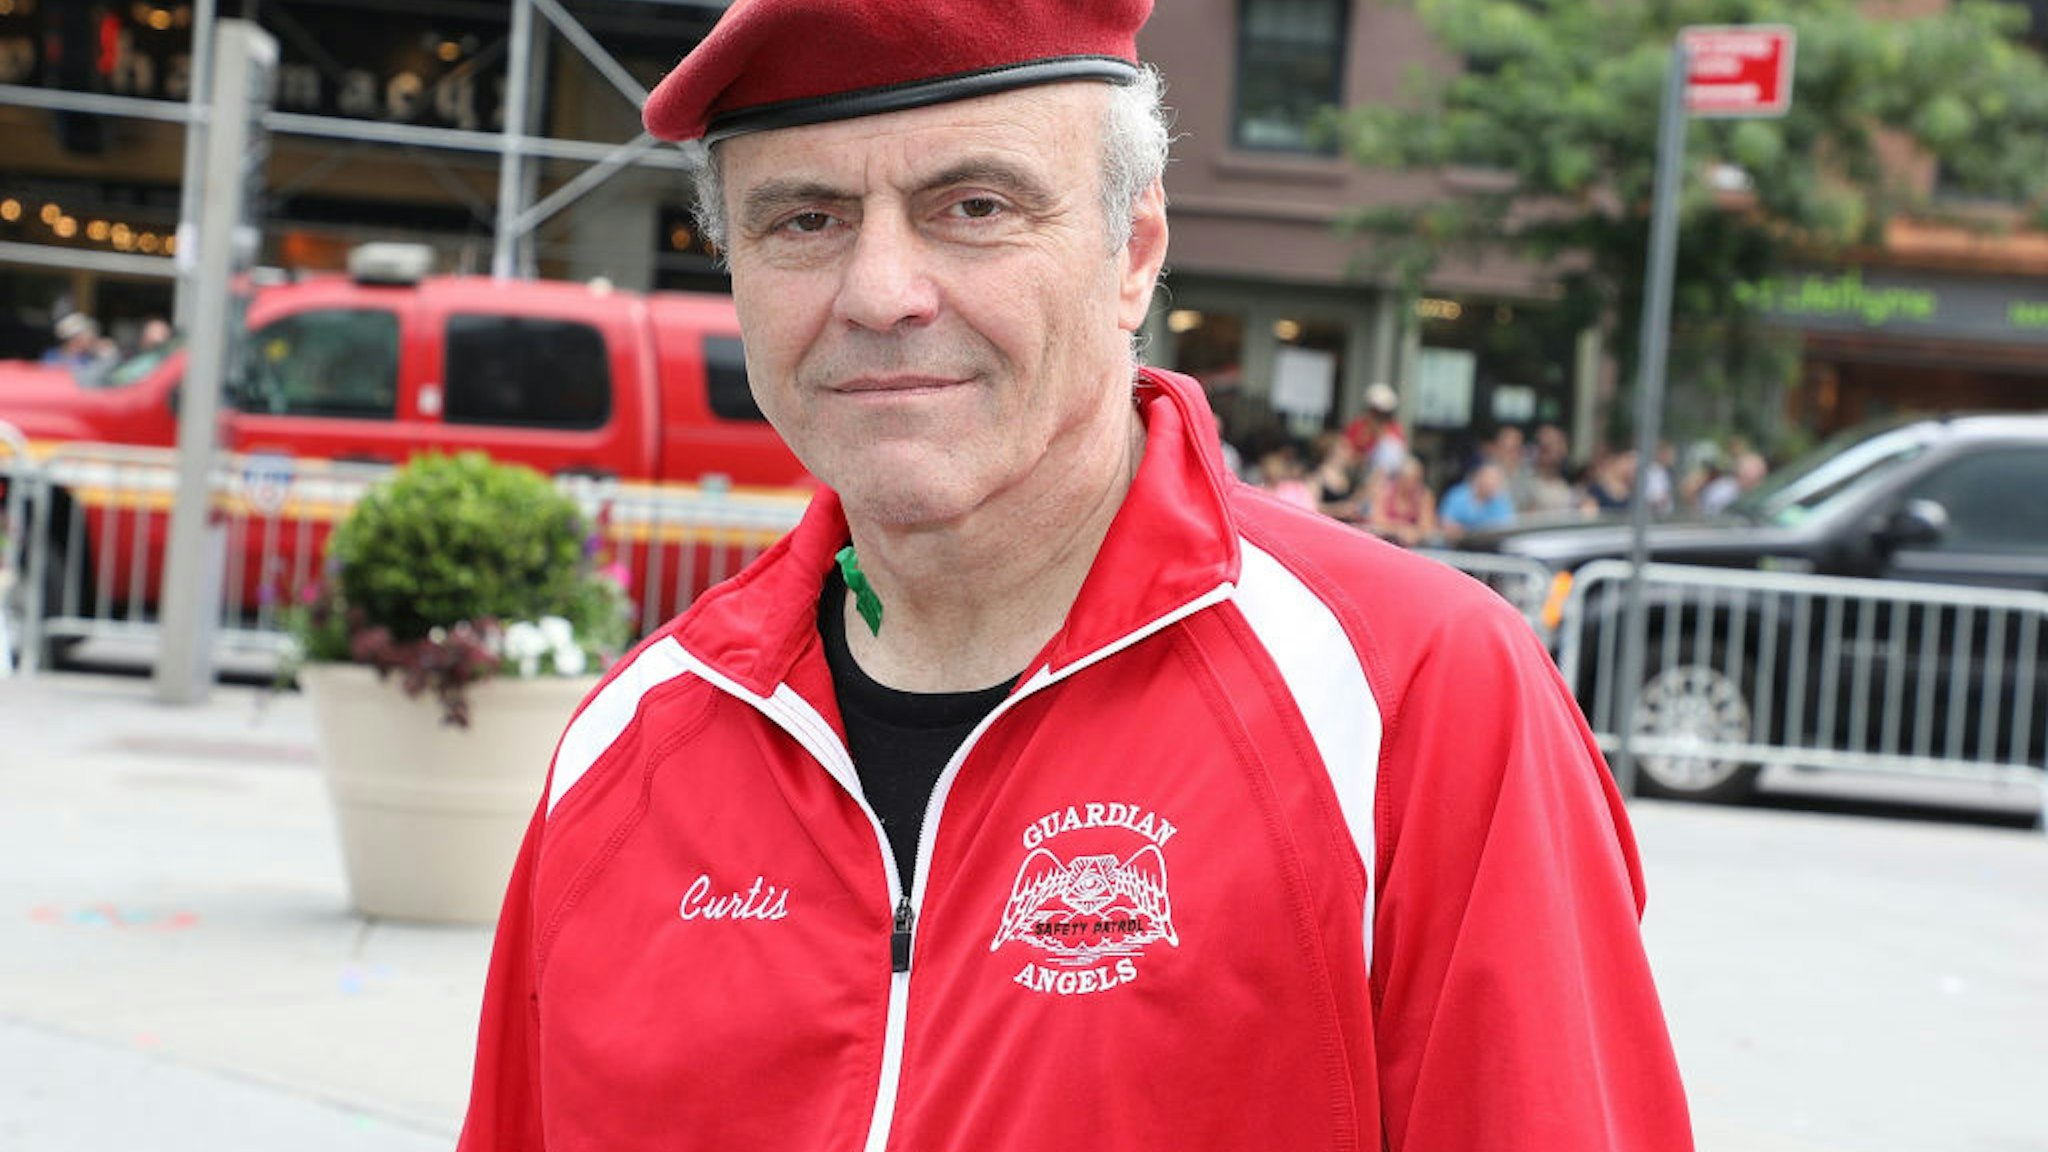 Curtis Sliwa attends the 2018 NYC Pride March on June 24, 2018 in New York City.